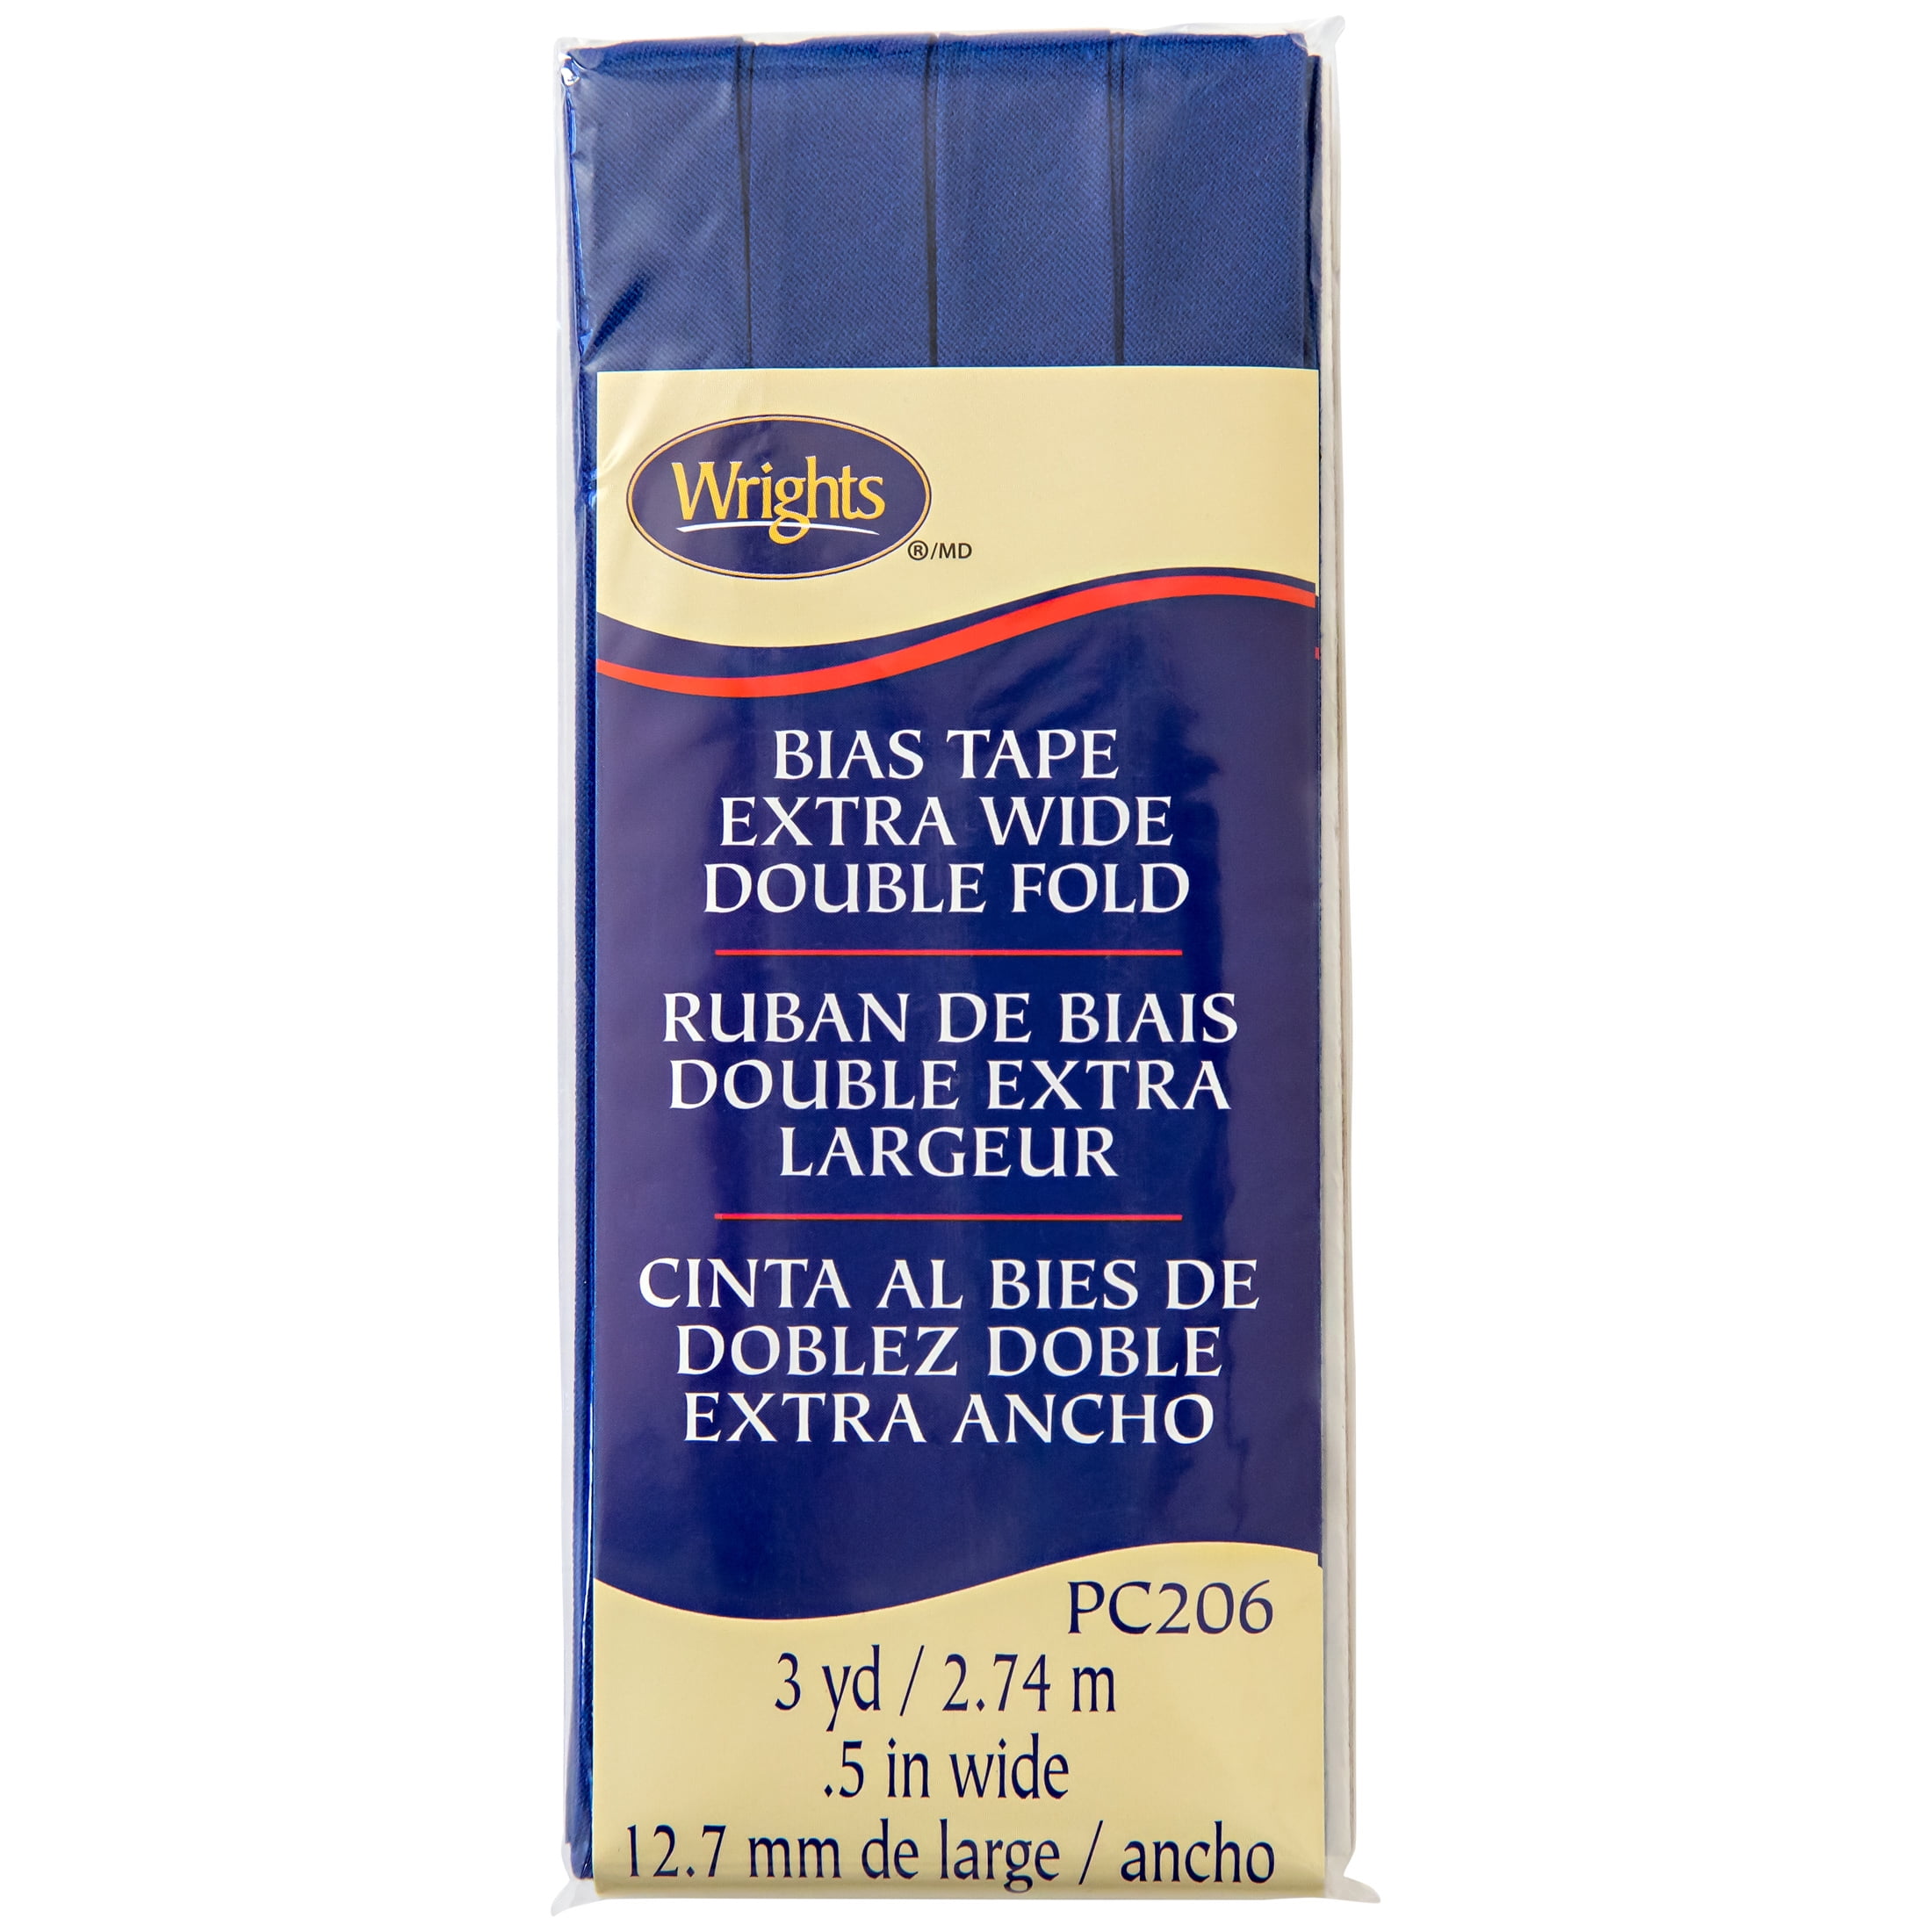 Wrights 1/2" Yale Blue Extra Wide Double Fold Bias Tape, 3 yd